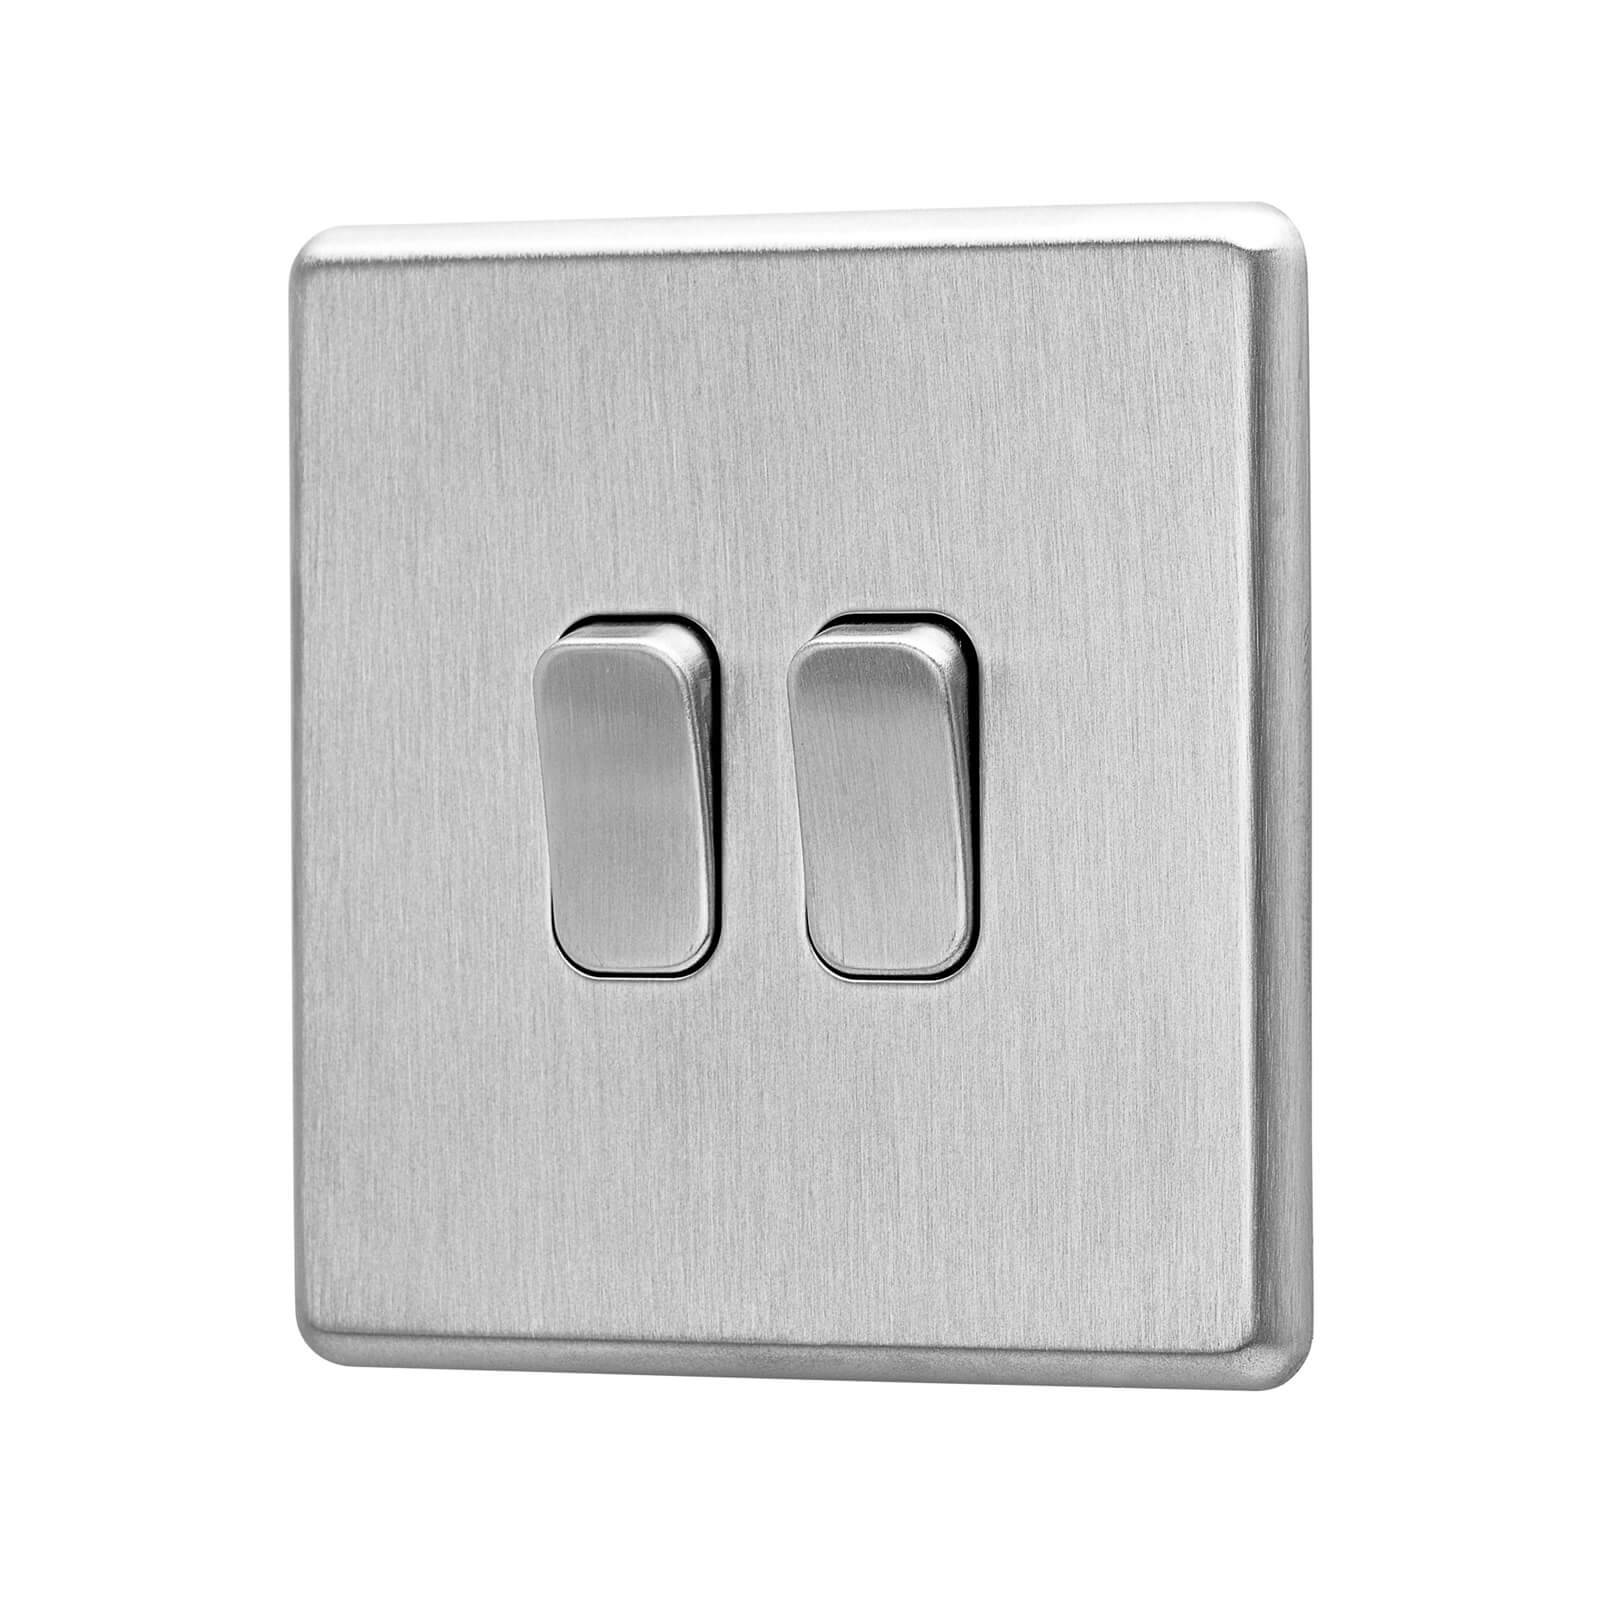 Arlec Fusion 10A 2Gang 2Way Stainless Steel Double light switch